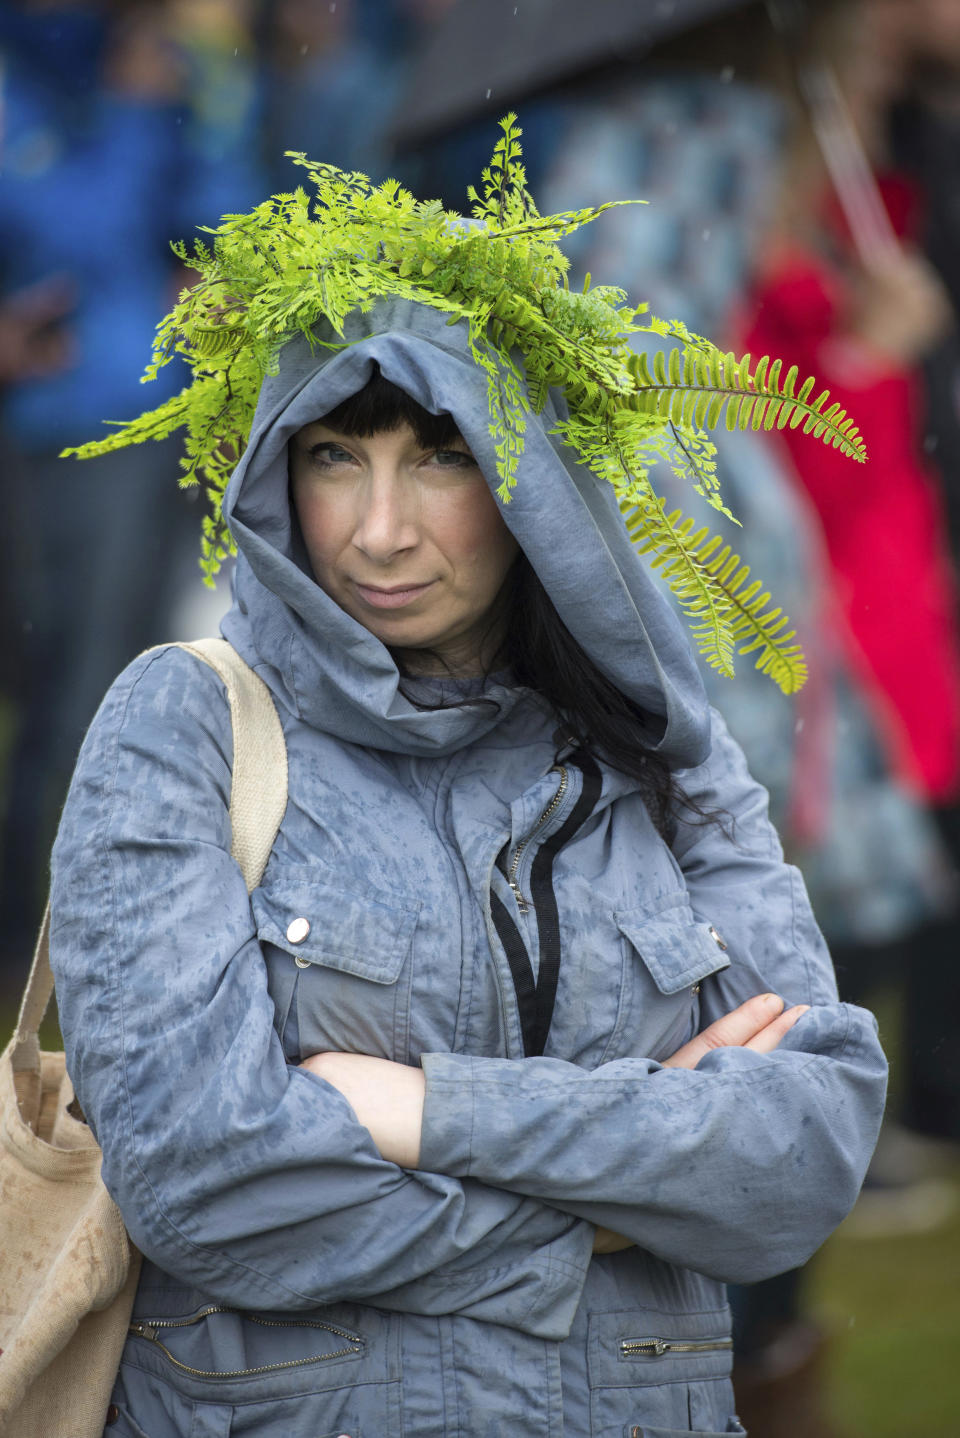 A woman wears foliage during the People's Walk for Wildlife in central London, Saturday Sept. 22, 2018. Some hundreds of people gathered in London to demand better protection for the country’s wildlife, with many carrying banners in support of various pro-nature and pro-animal causes. (Dominic Lipinski/PA via AP)